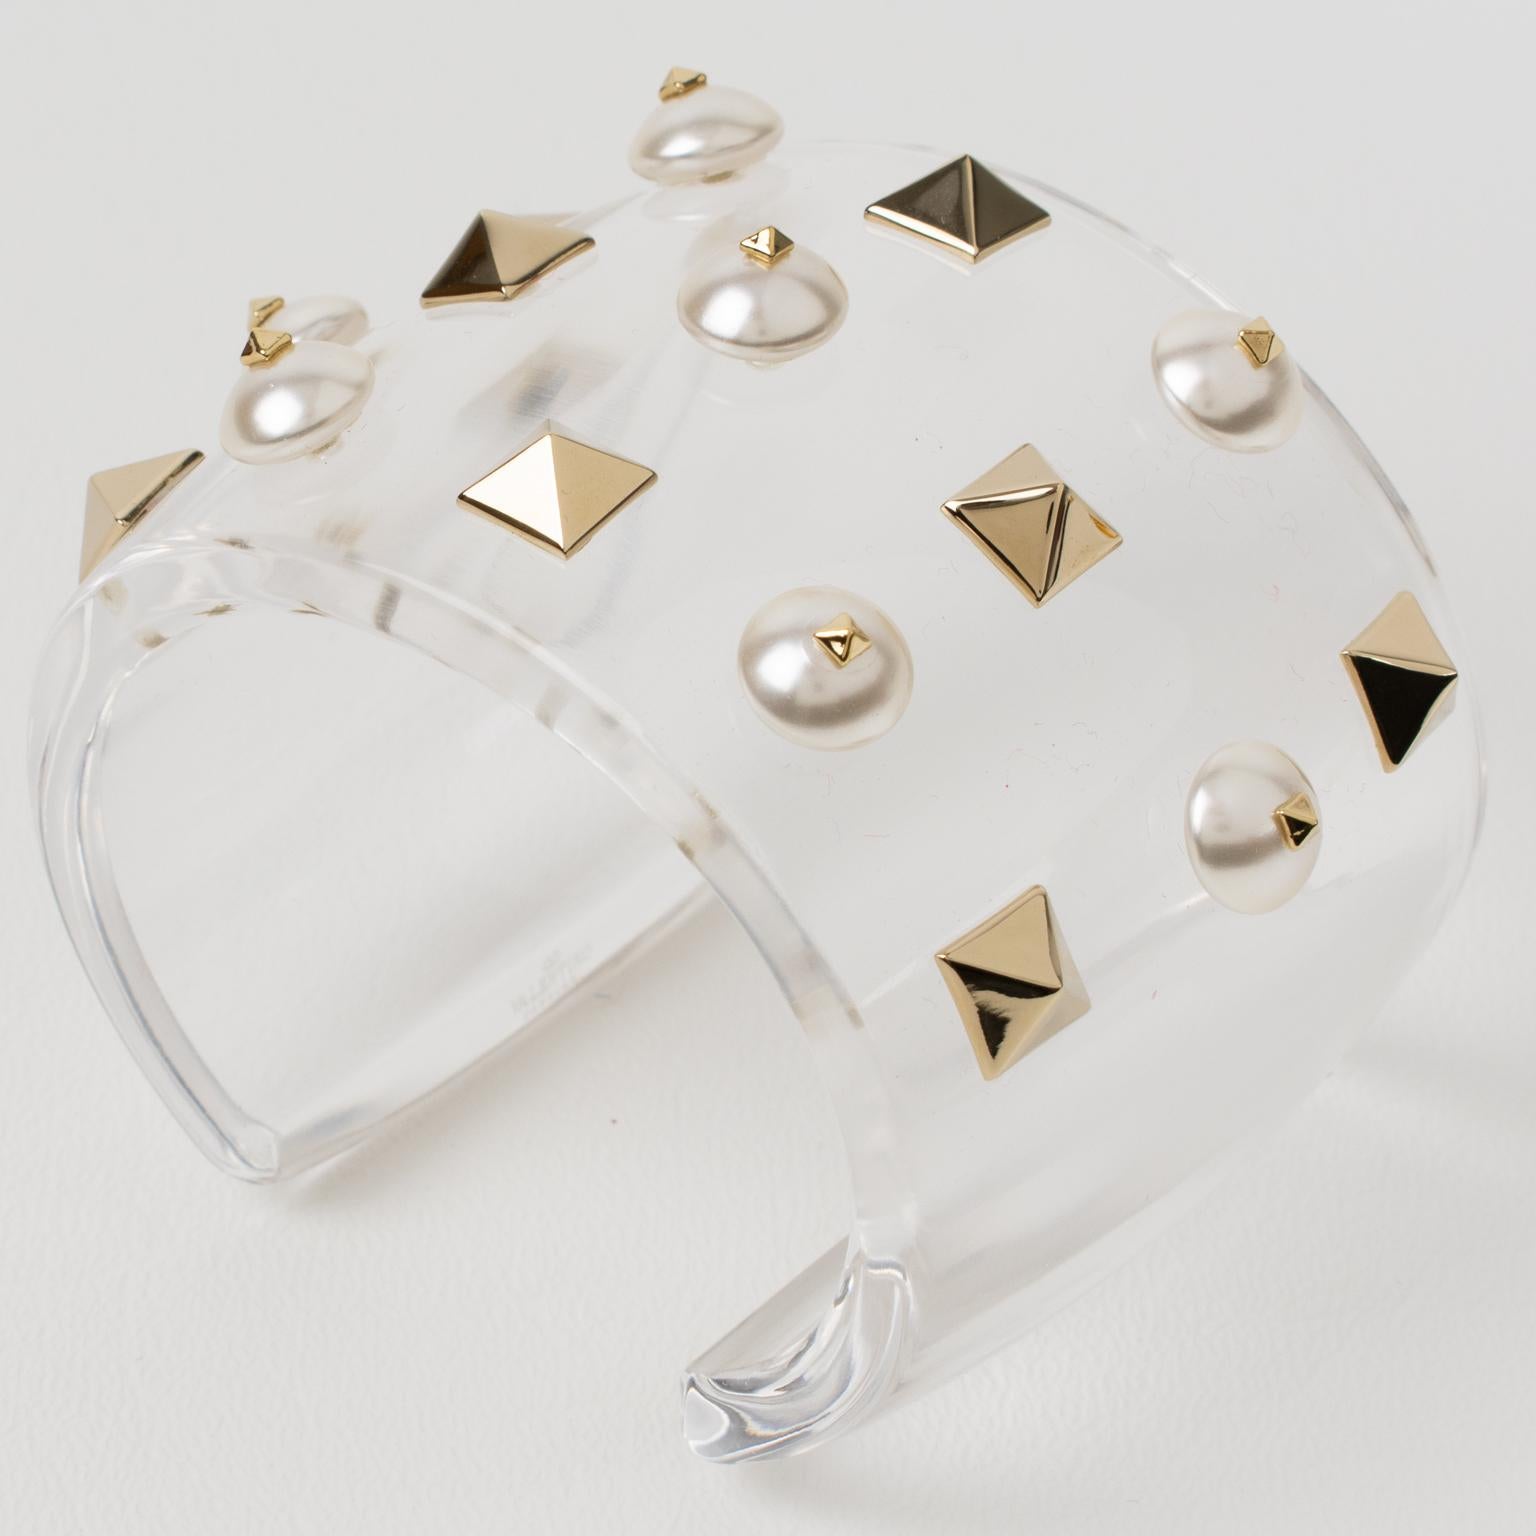 Adorable oversized Valentino Garavani jeweled bracelet bangle. Chunky cuff shape made of crystal clear acrylic resin ornate with chromed metal pyramid studs and topped with pearl-like cabochons. Valentino's hallmark is engraved on the inside of the